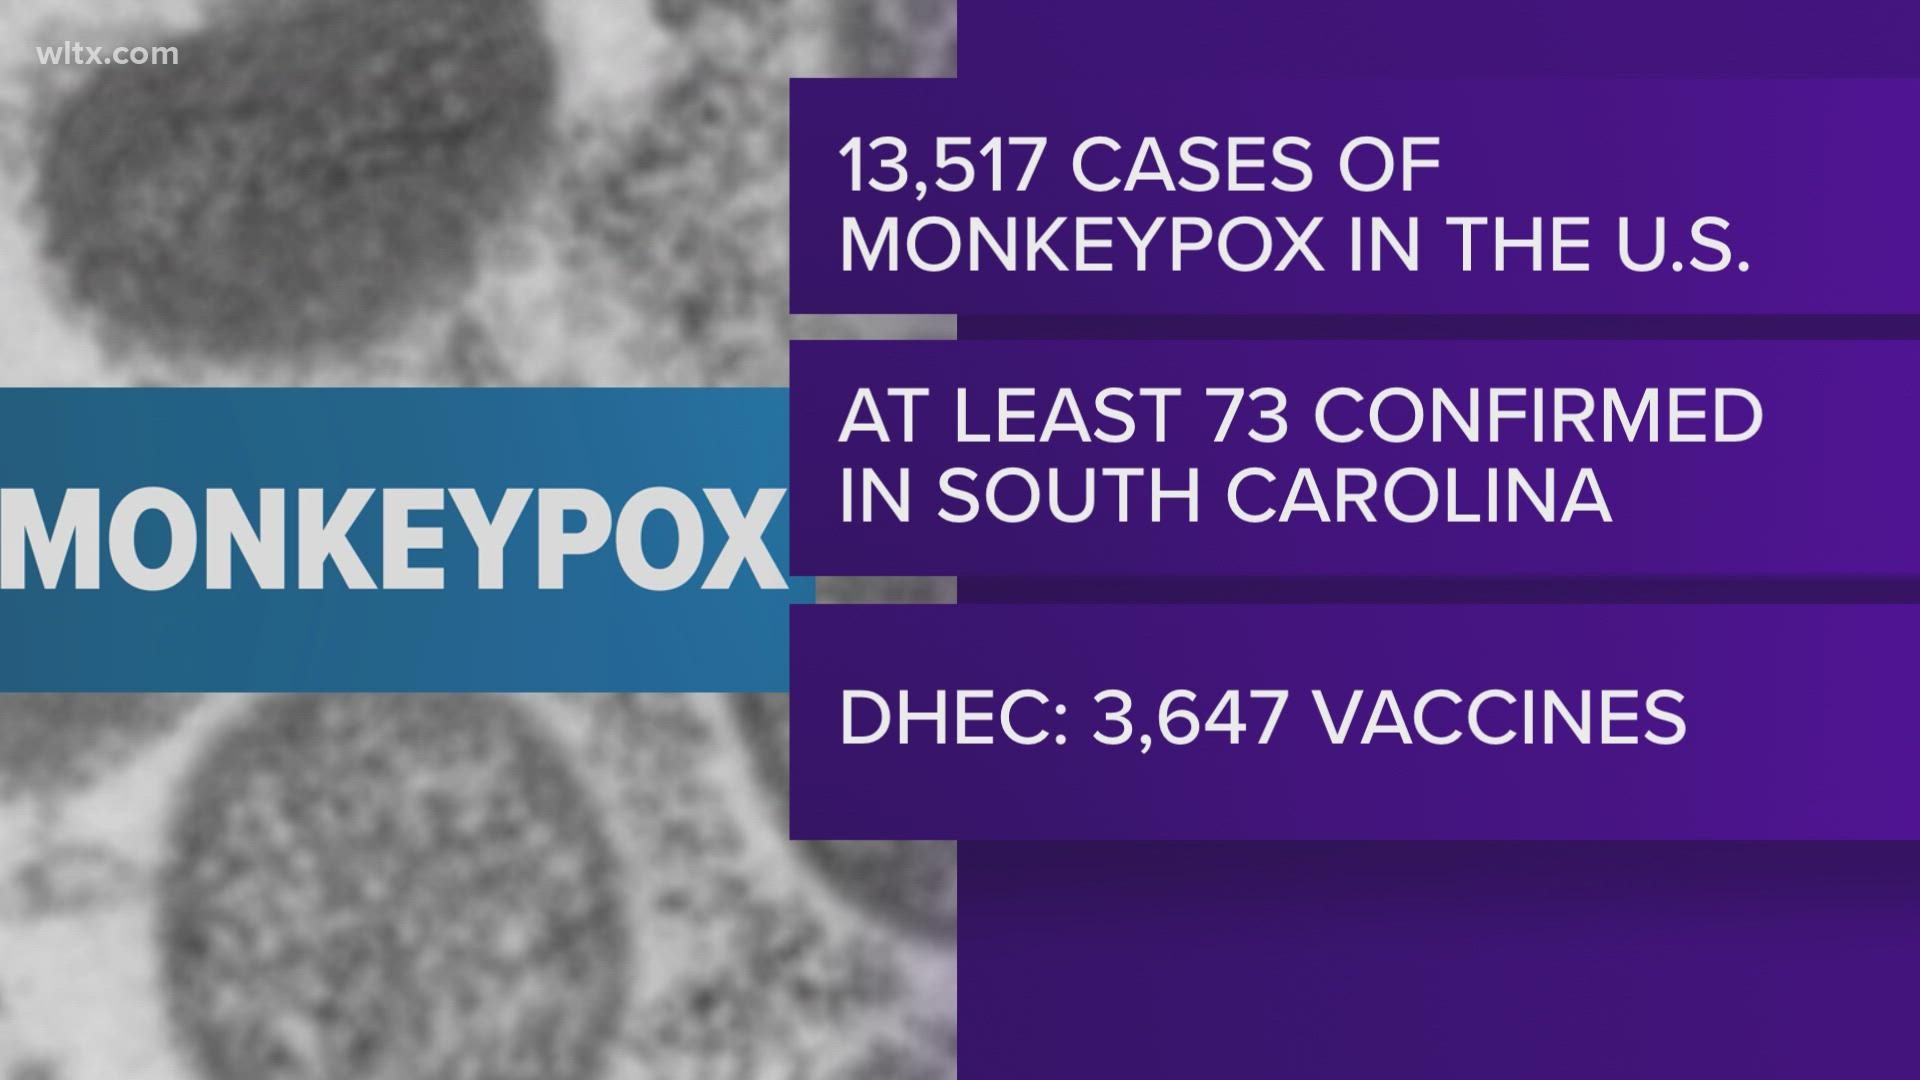 The CDC is now reporting over 13,500 confirmed cases of monkeypox around the US.